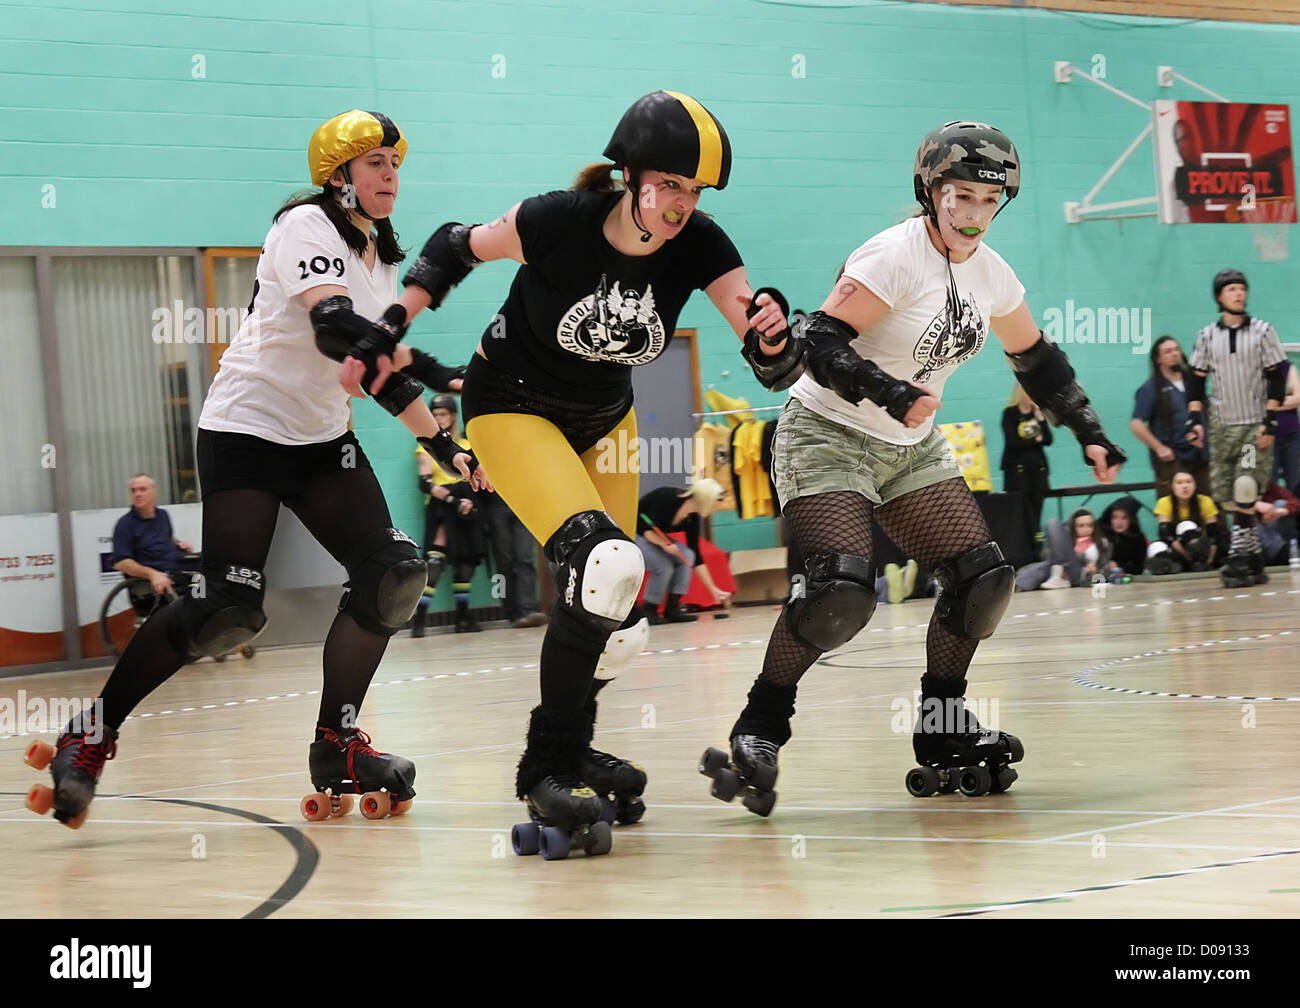 Atmosphere The Liverpool Roller Birds Roller Derby team, host their first  ever home bout "A Hard Day's Fight" at Greenbank Stock Photo - Alamy